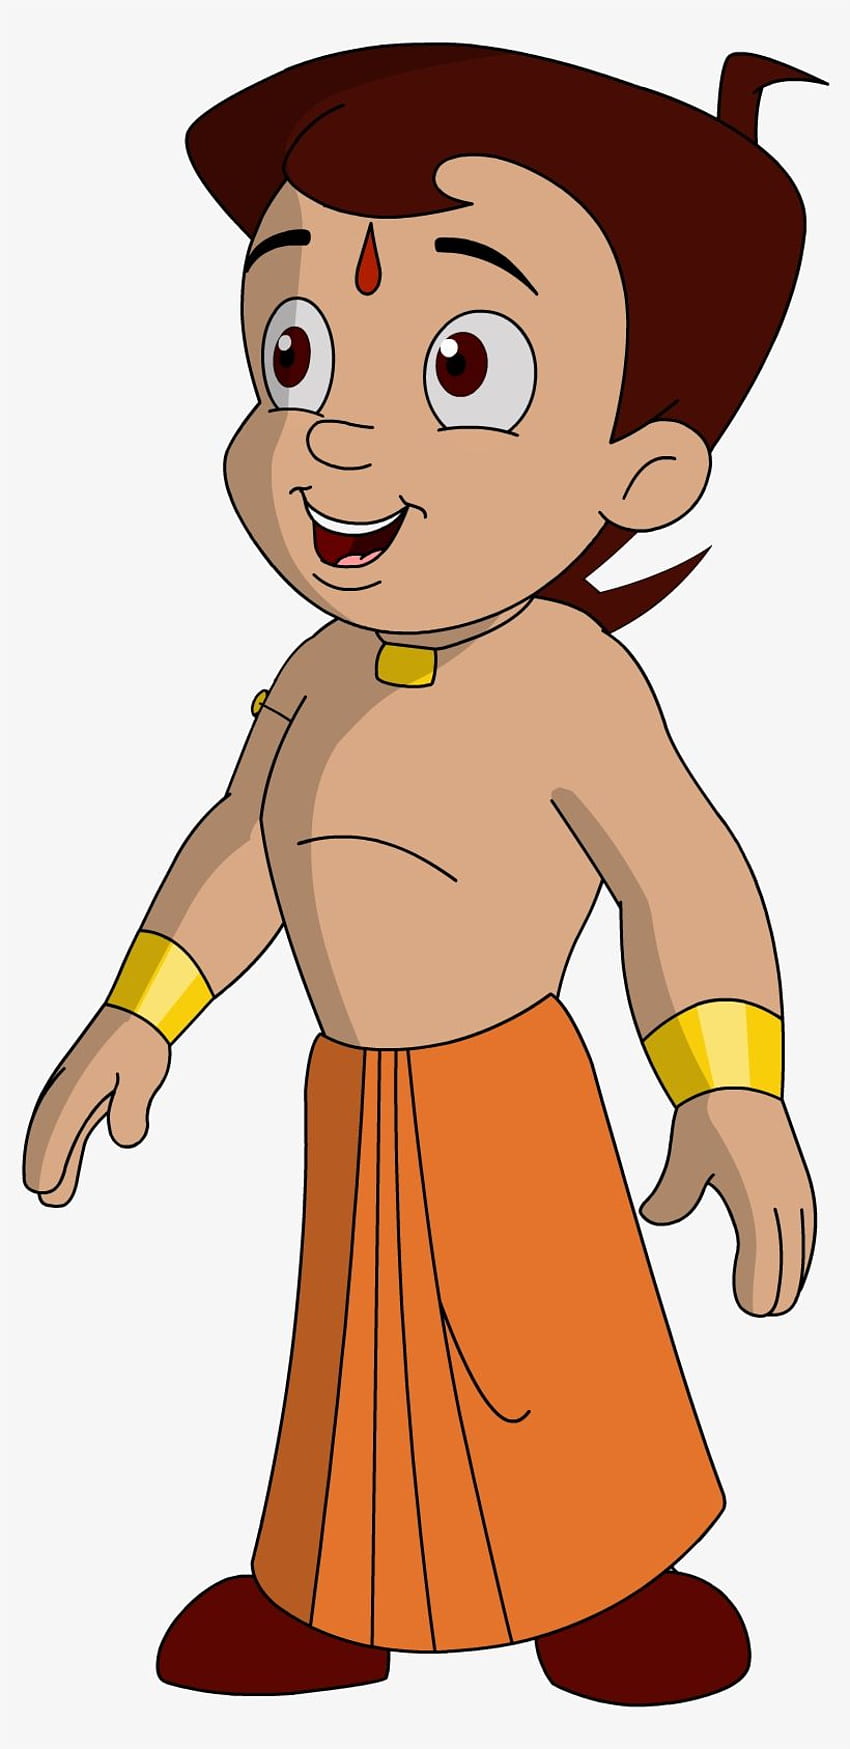 Drawing Characters from Chota Bheem Coloring Pages - NetArt | Coloring  pages, Drawings, Coloring pictures